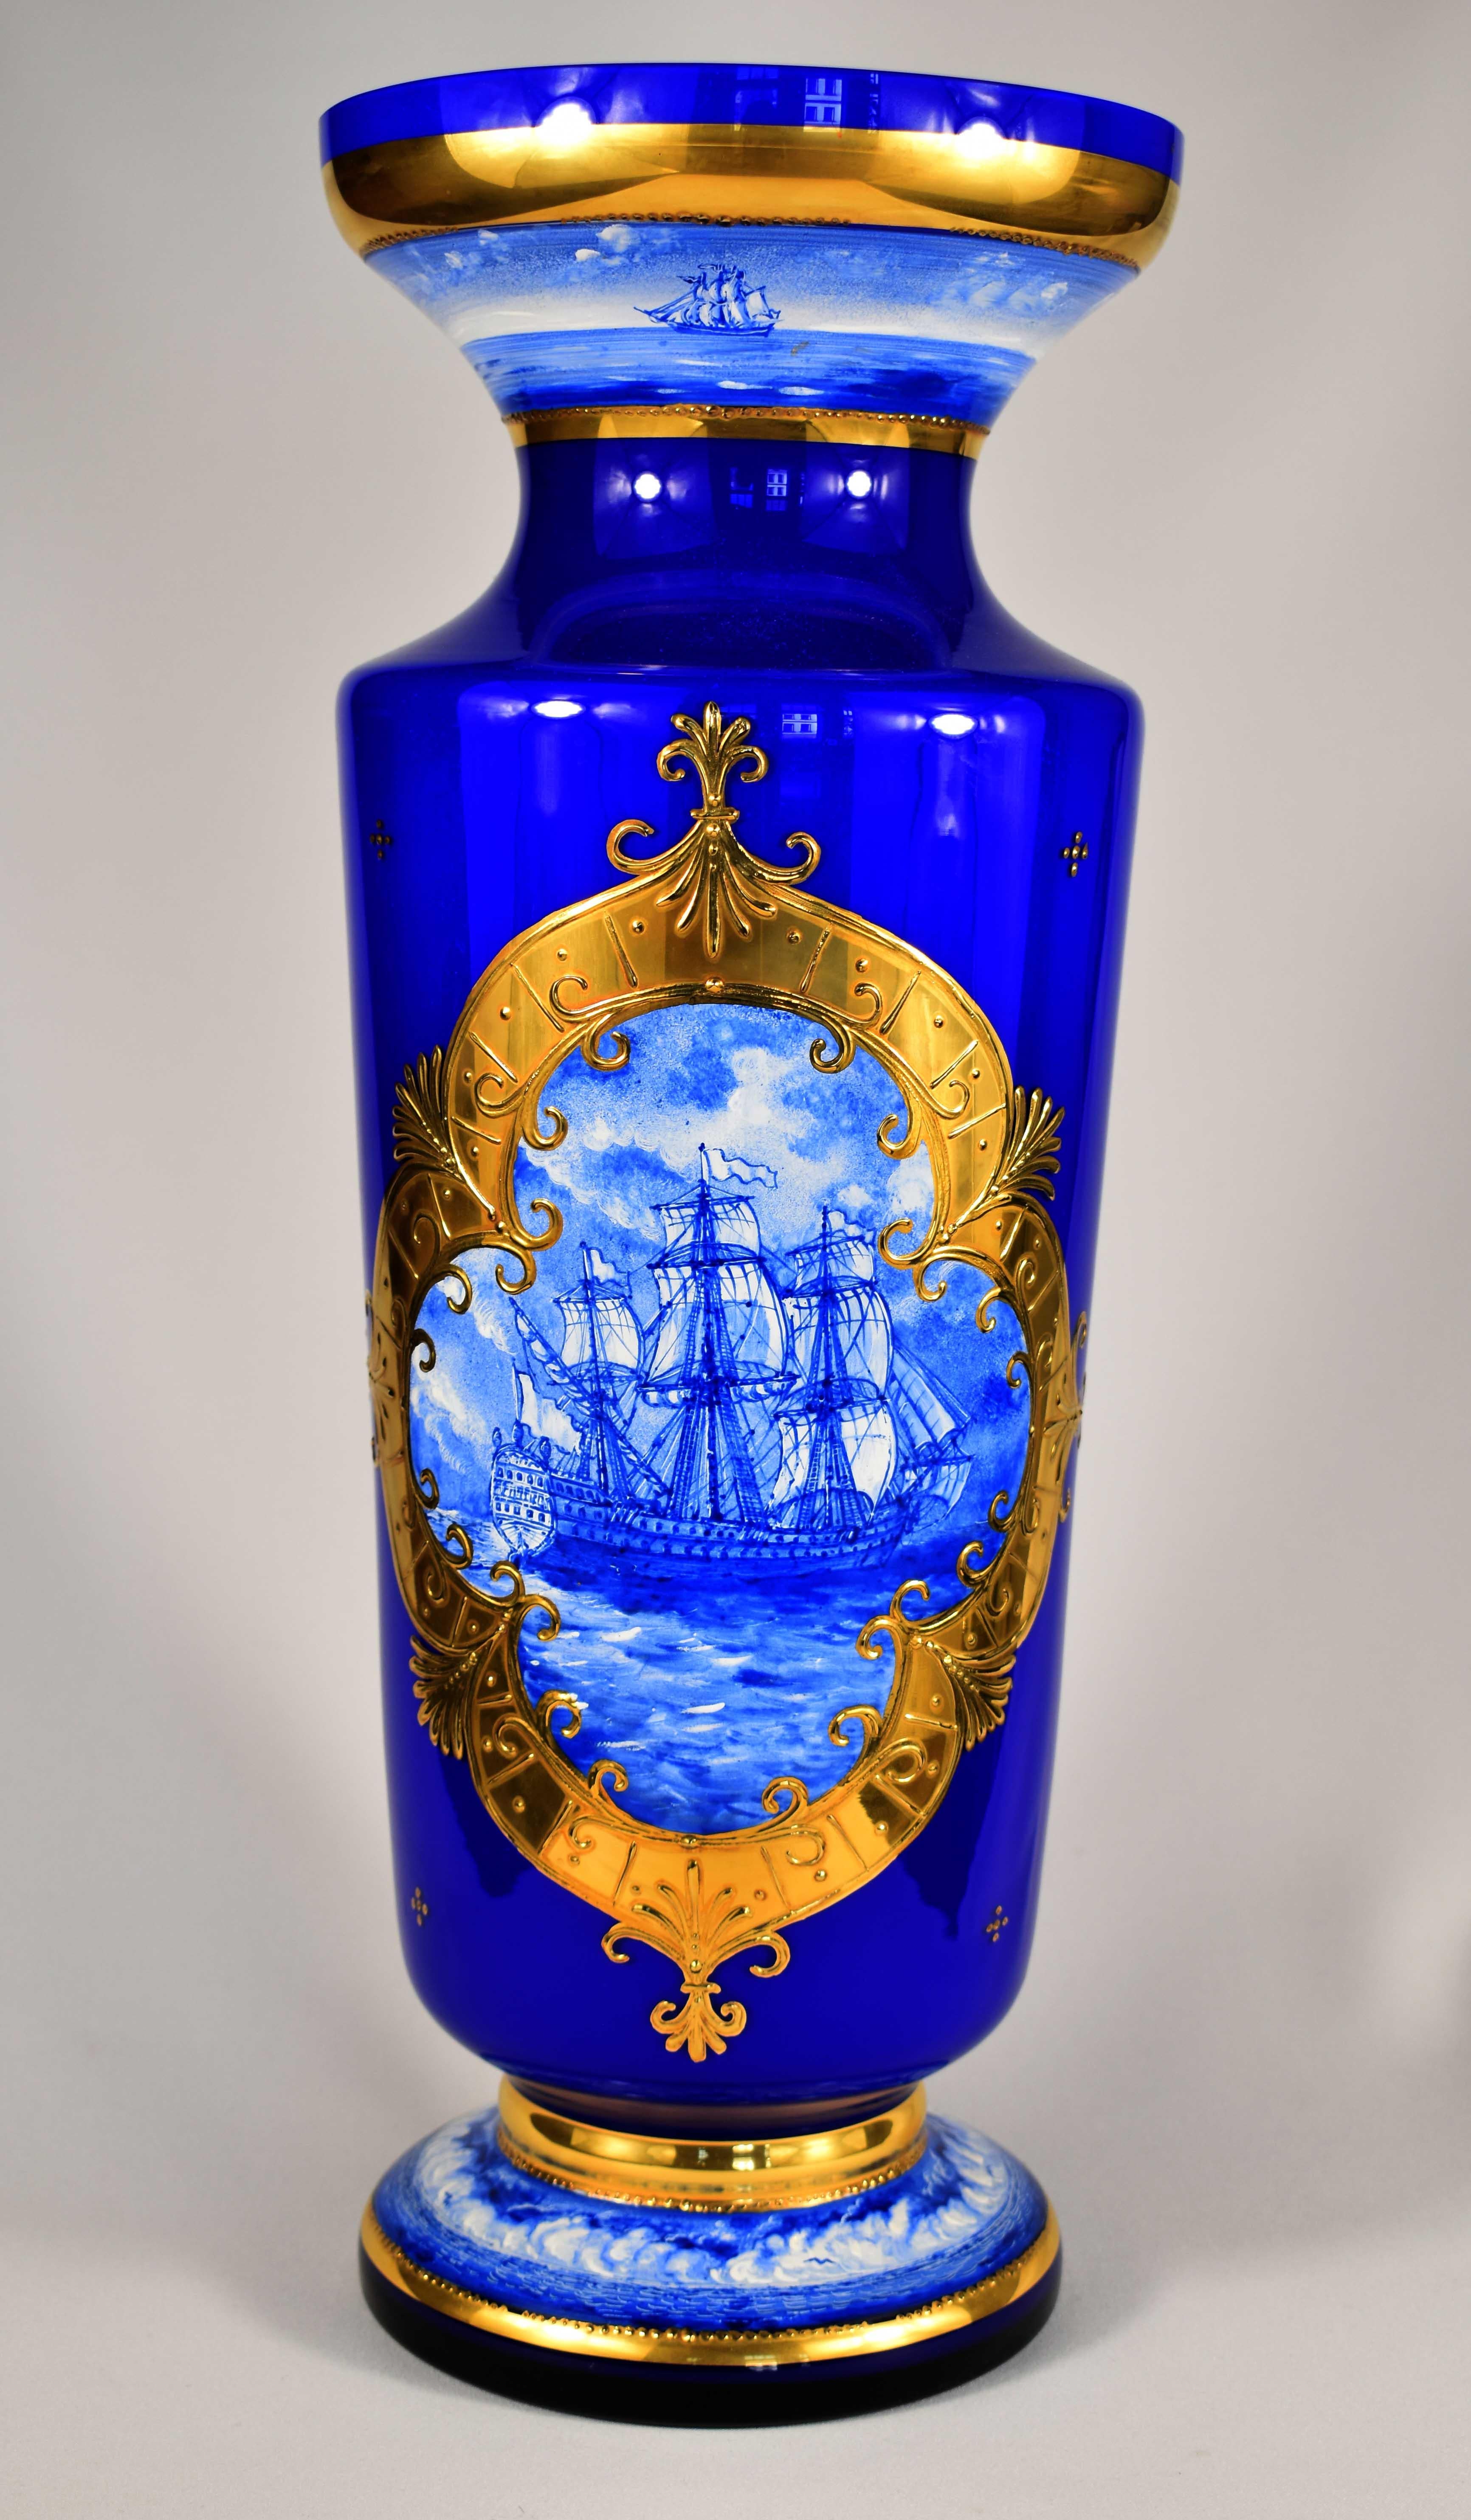 Beautiful large handmade vase, It is opal glass overlay with blue cobalt glass, The vase is hand-painted with the motif of naval ships, the painting of the ships is done in blue shades and the ornaments are gilded, This is 100% handmade author work,